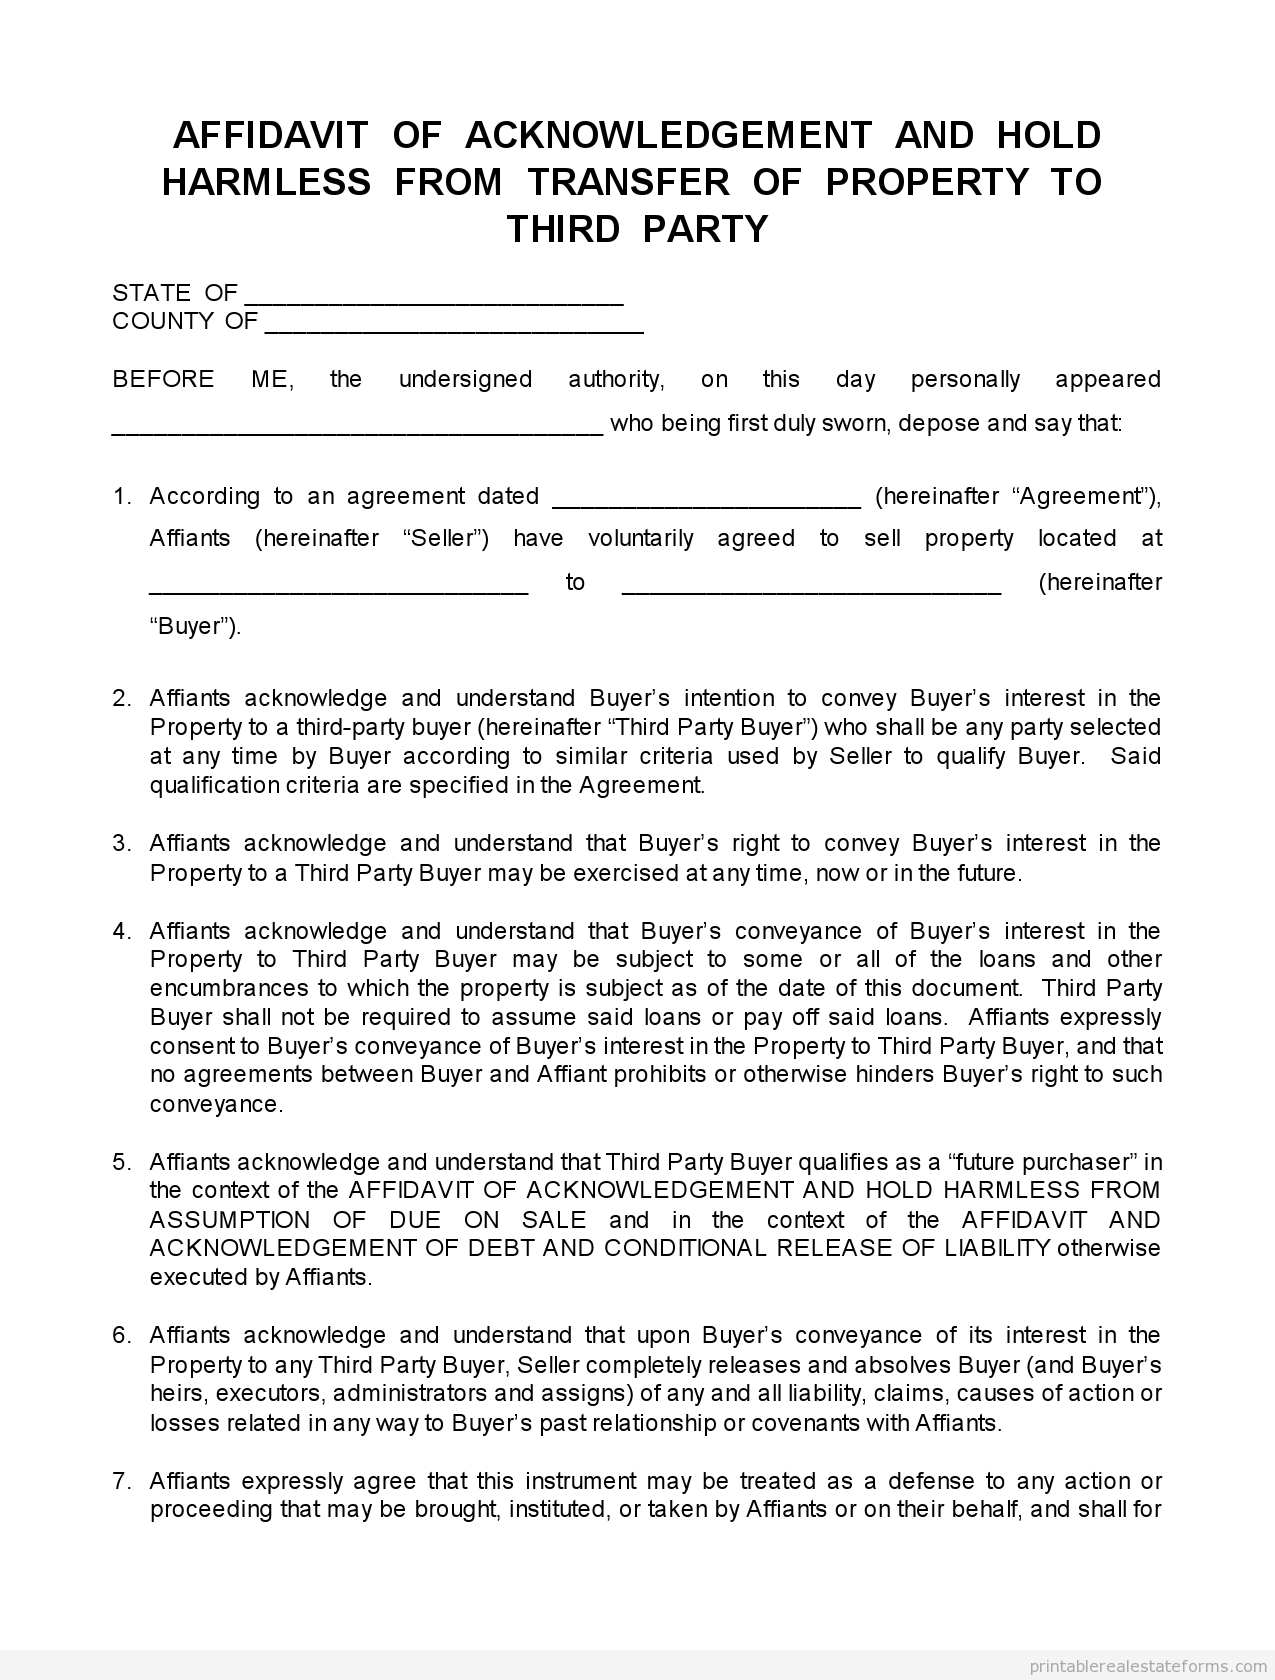 Disclosure-Transfer To Third Party (Printable Sample)